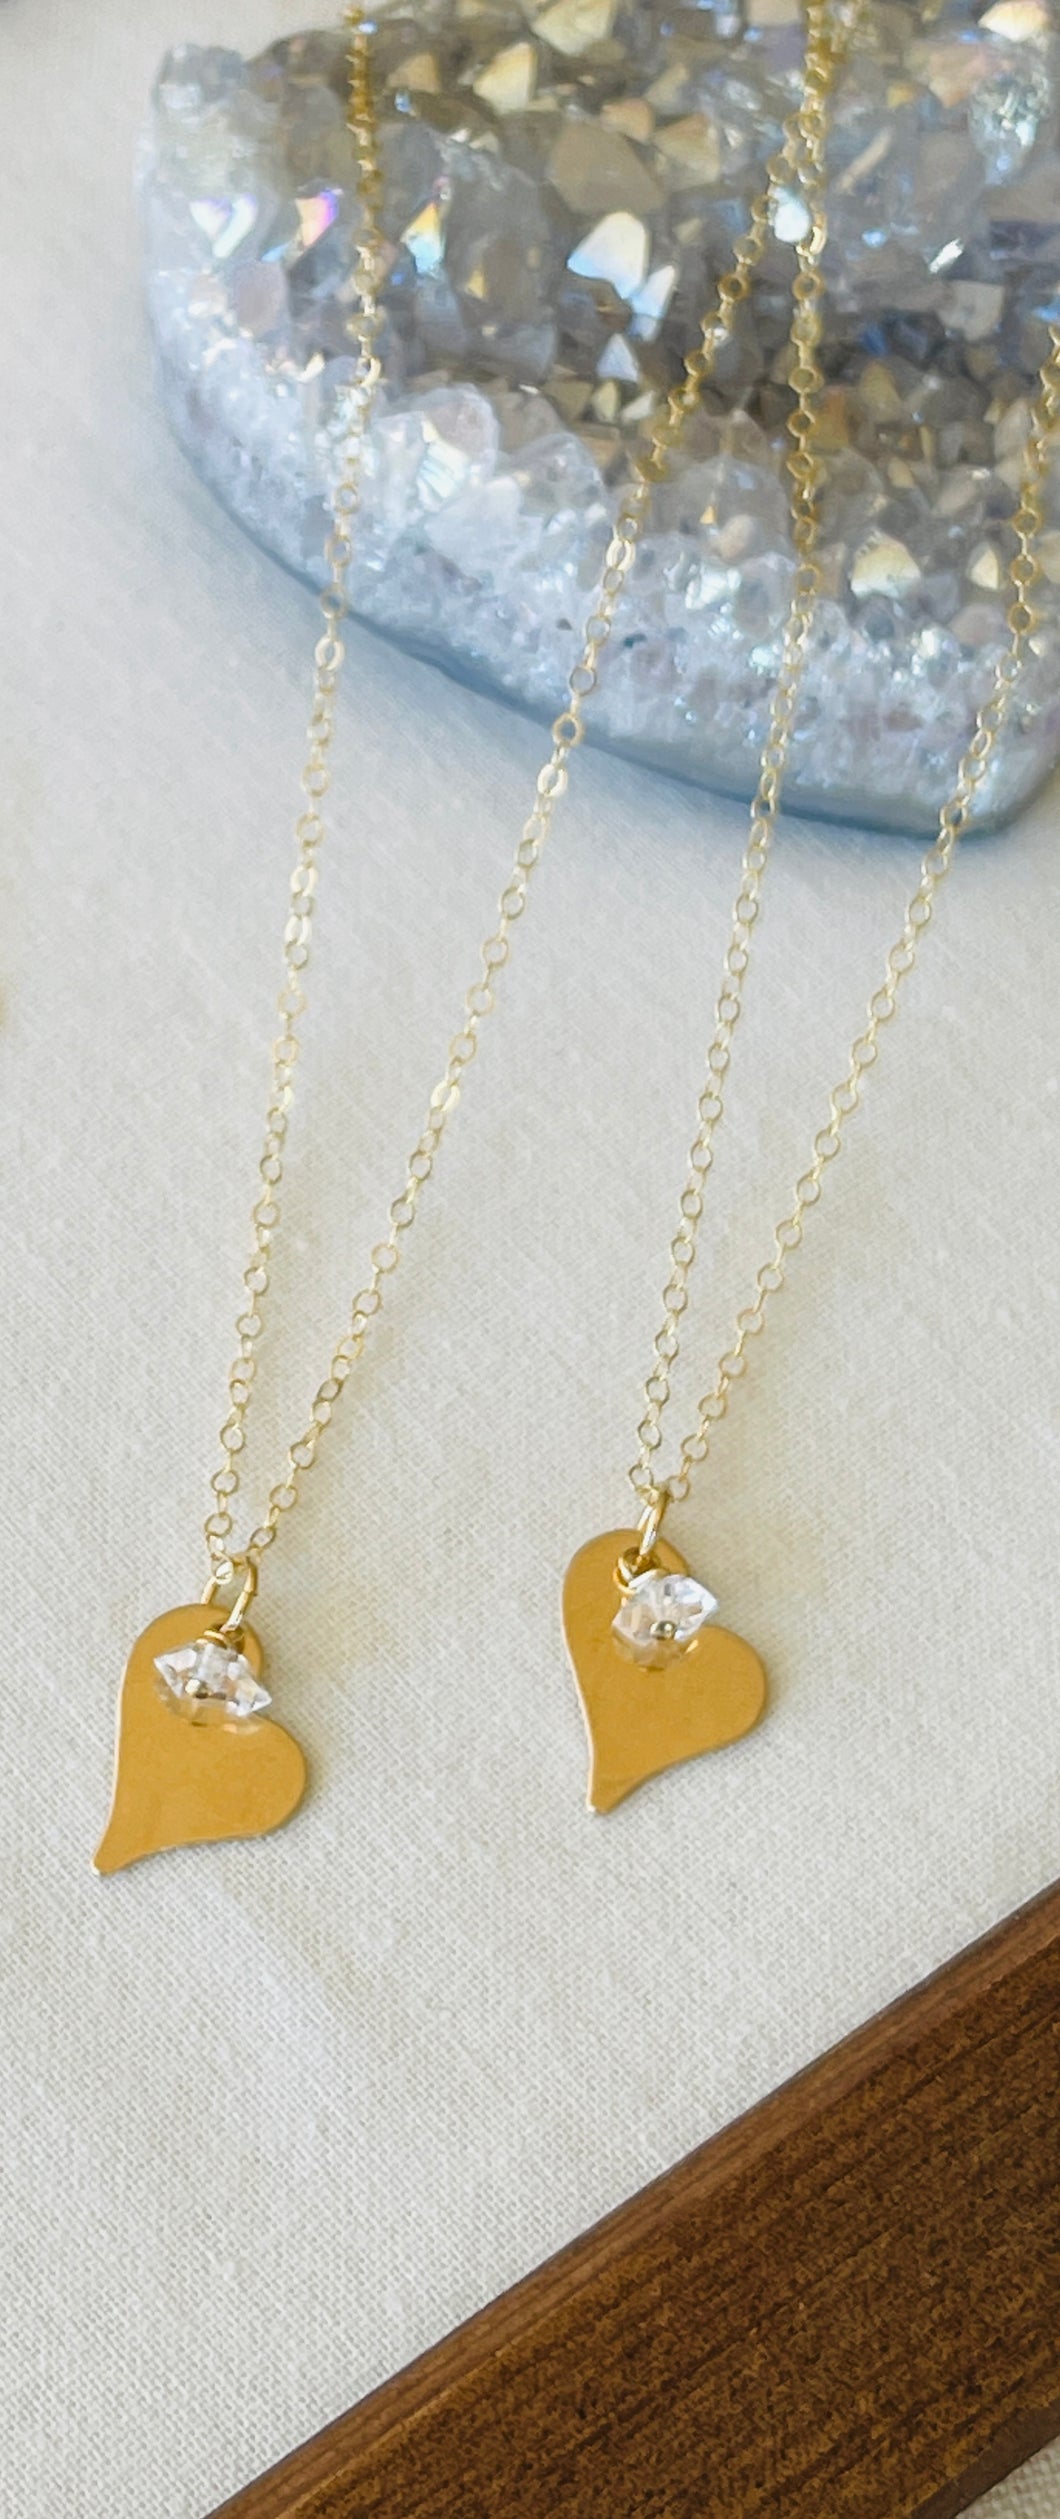 V-day special necklace